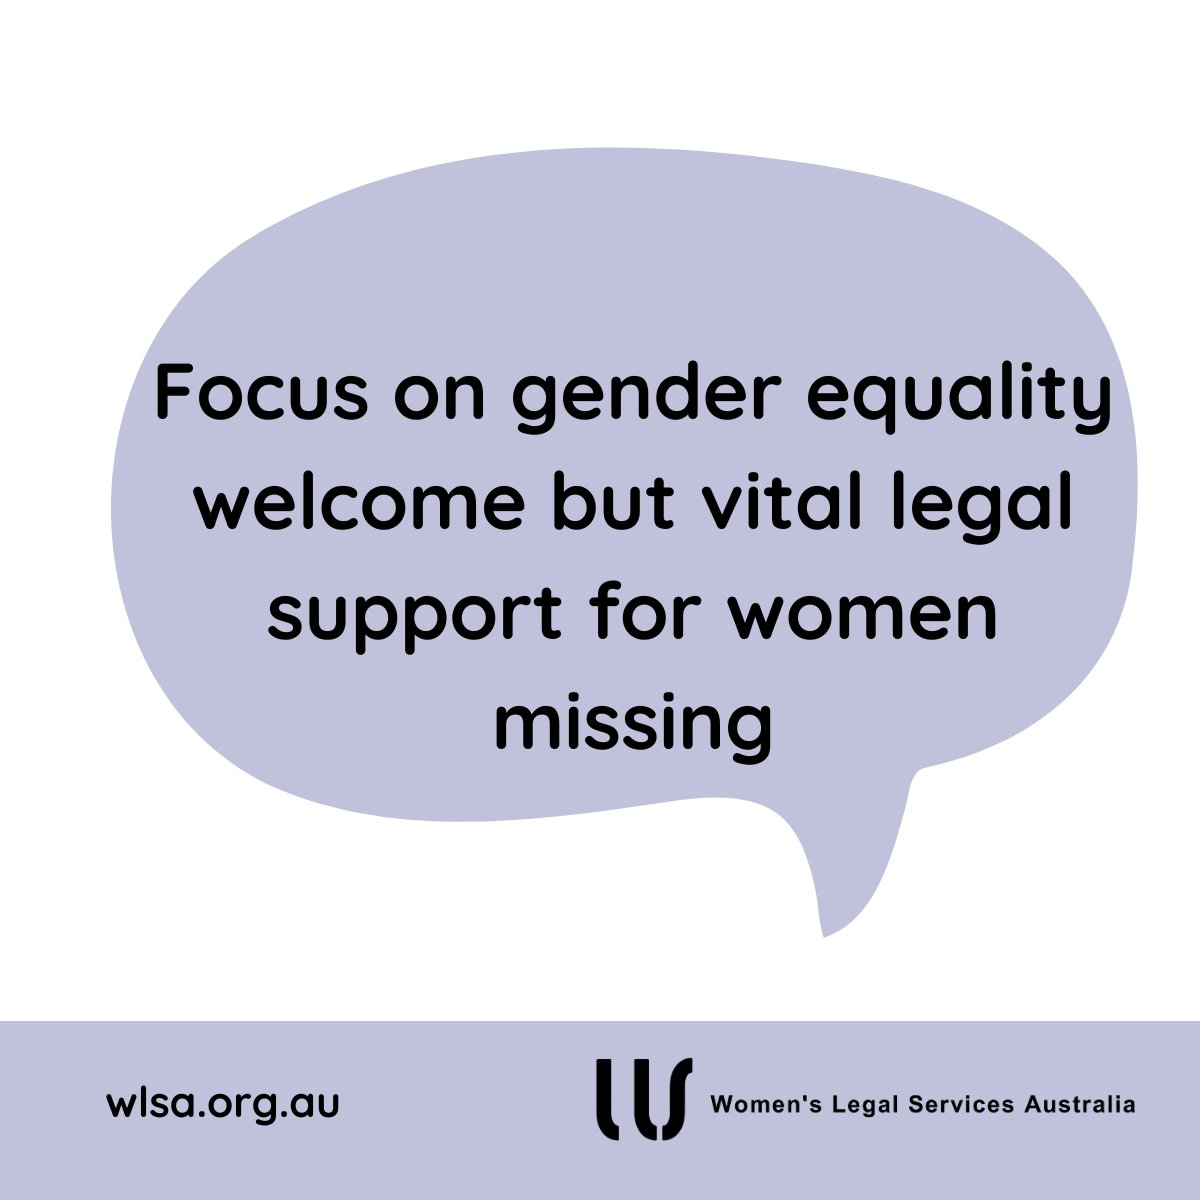 Our response to #FederalBudget2023

'We welcome the focus on gender equality but Women’s Legal Services, vital to the safety and recovery of women and children experiencing violence, will continue to be underfunded'.

Read our media release here: wlsa.org.au/wp-content/upl…